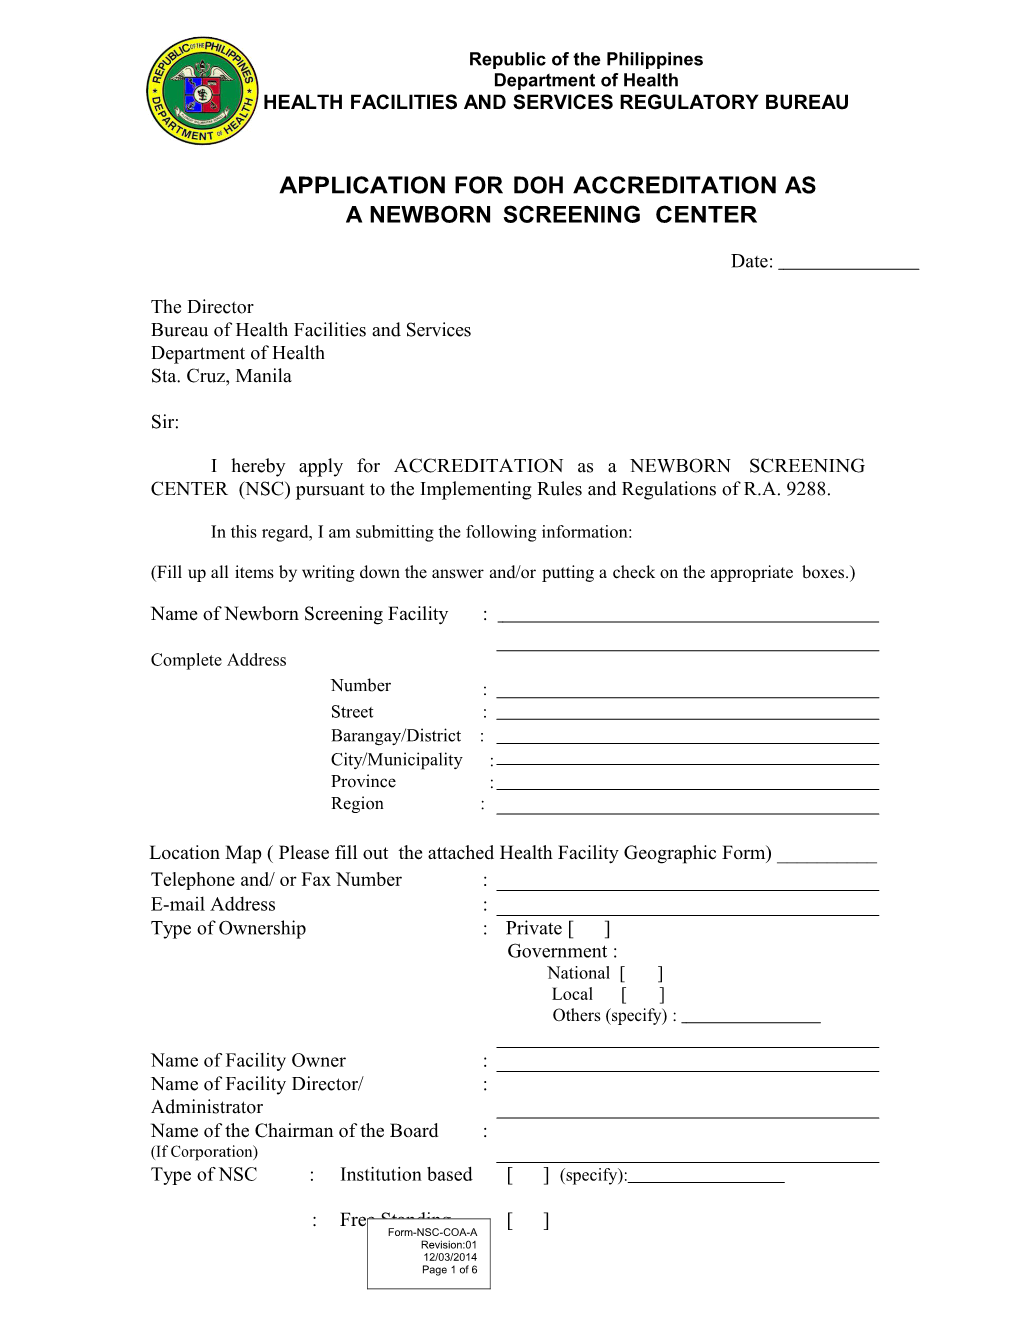 Application for Doh Accreditation As